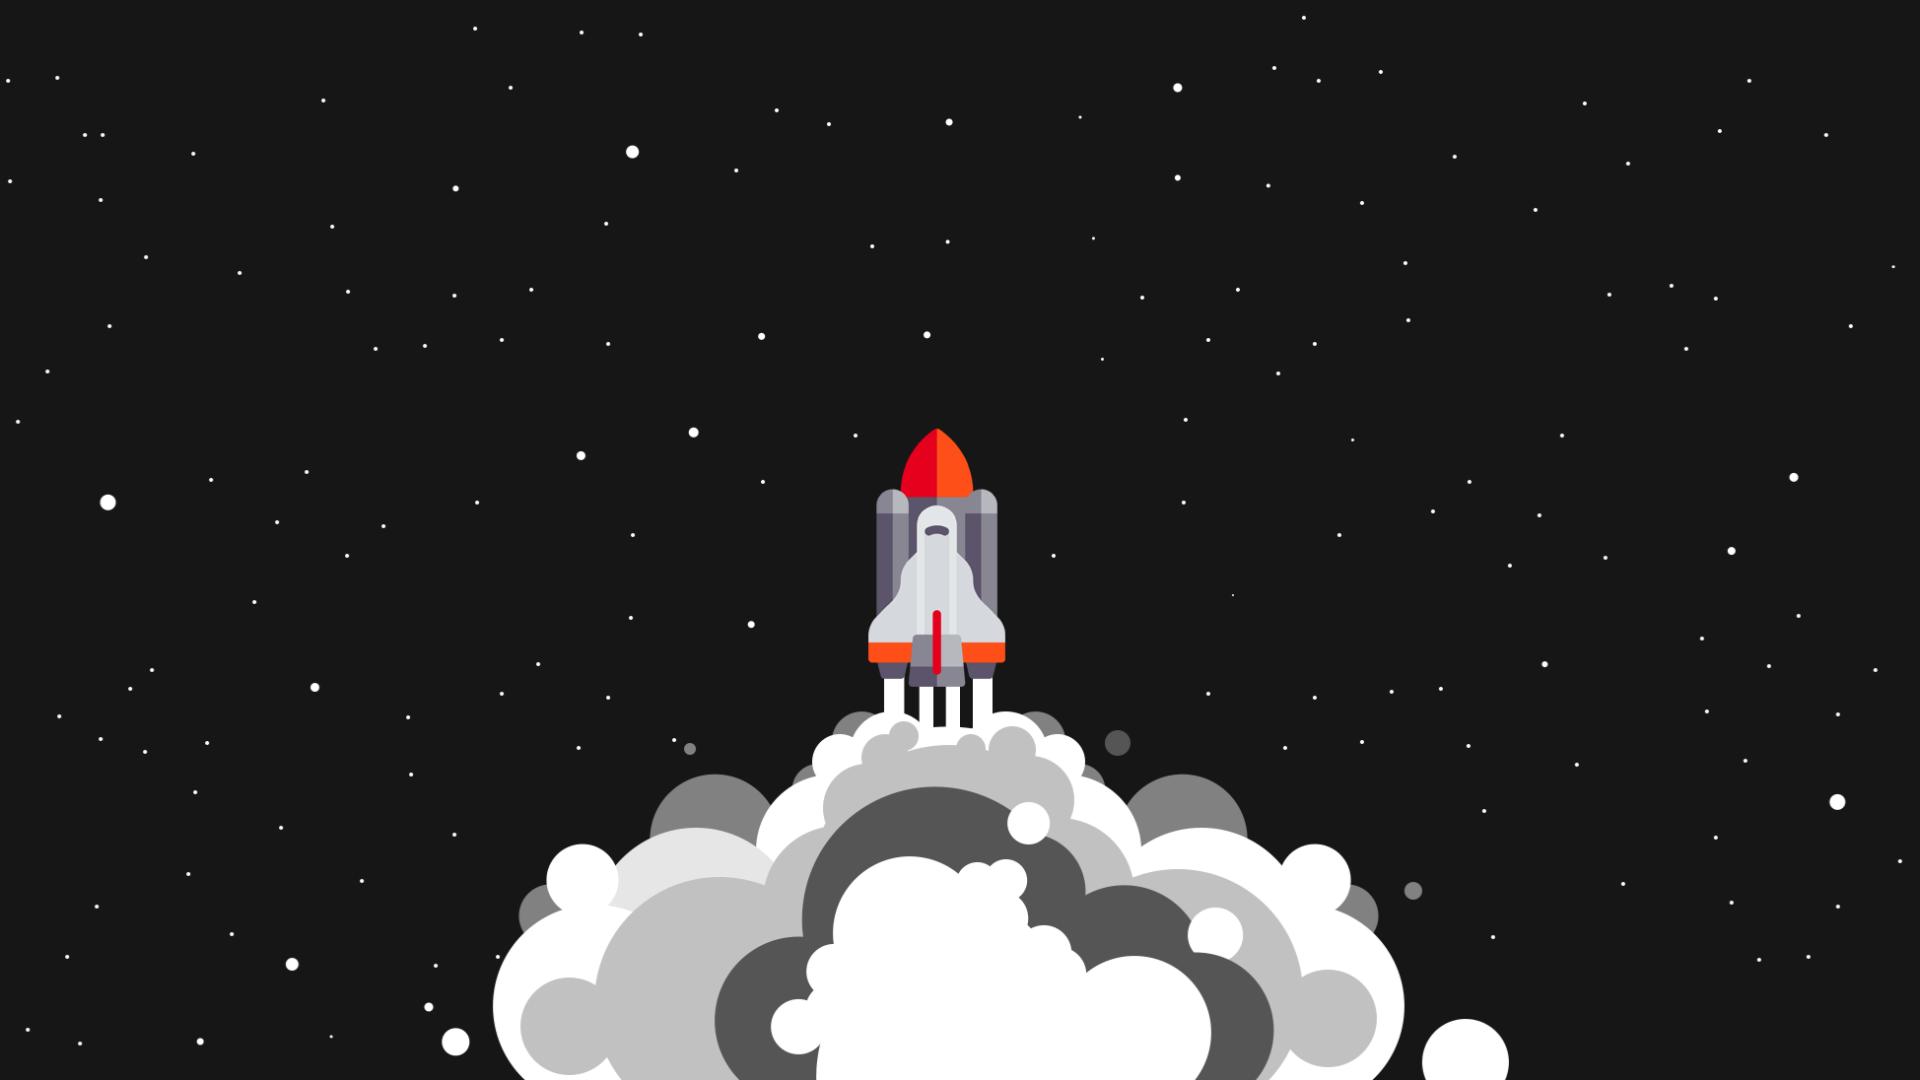 Cartoon Space Wallpapers - Top Free Cartoon Space Backgrounds